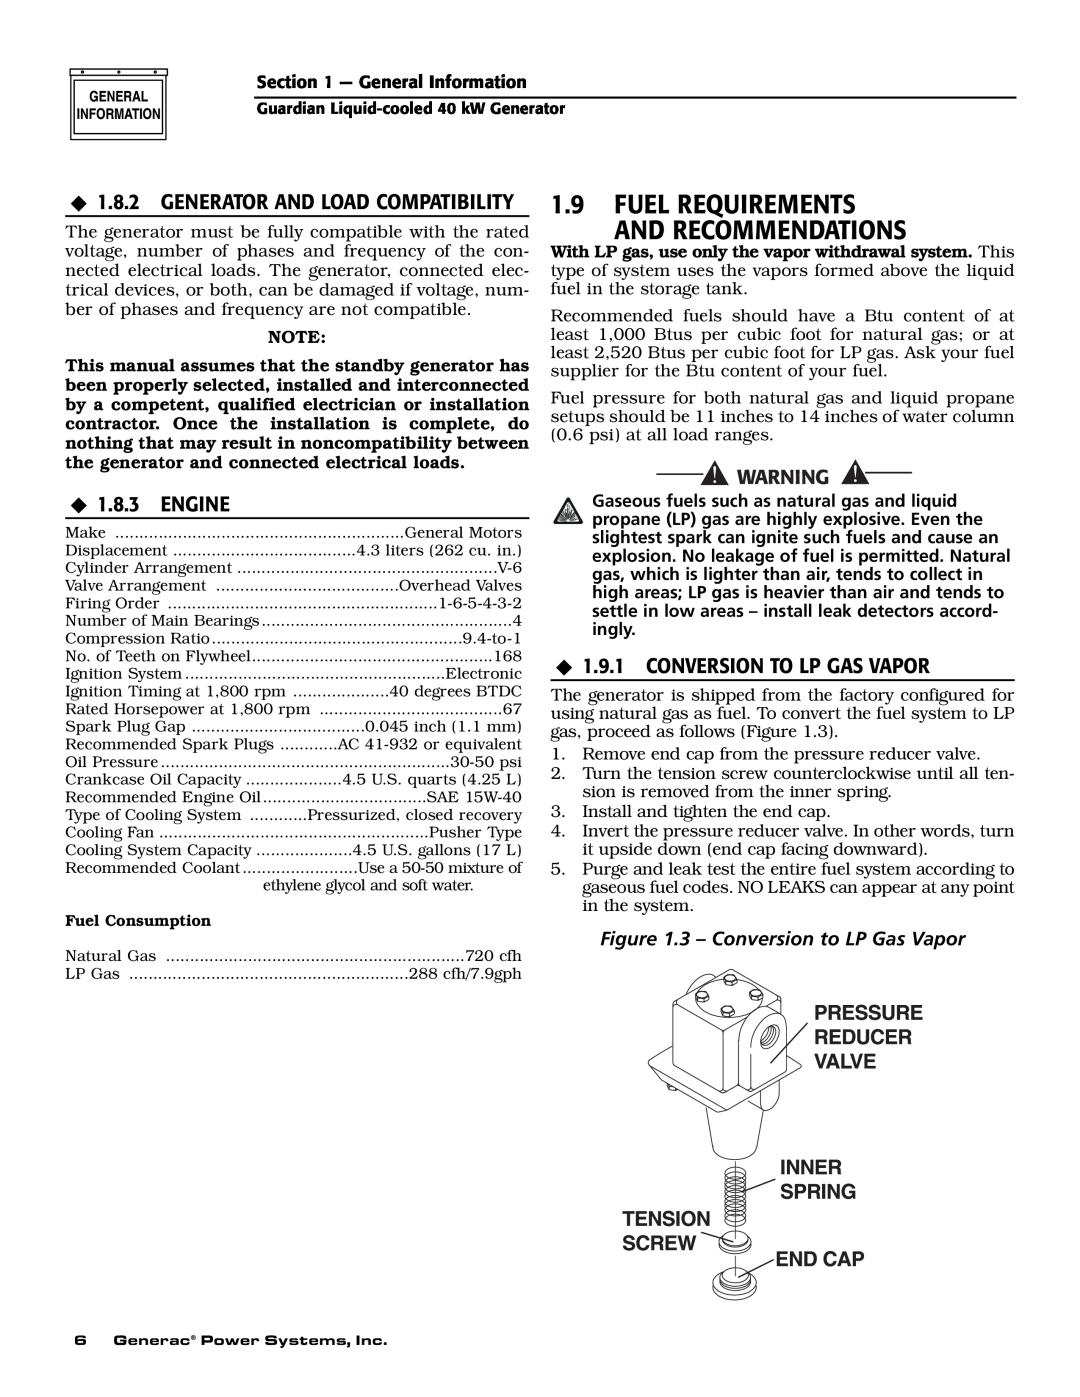 Generac Power Systems 46263, 43734, 43733 Fuel Requirements And Recommendations, ‹ 1.8.2 GENERATOR AND LOAD COMPATIBILITY 